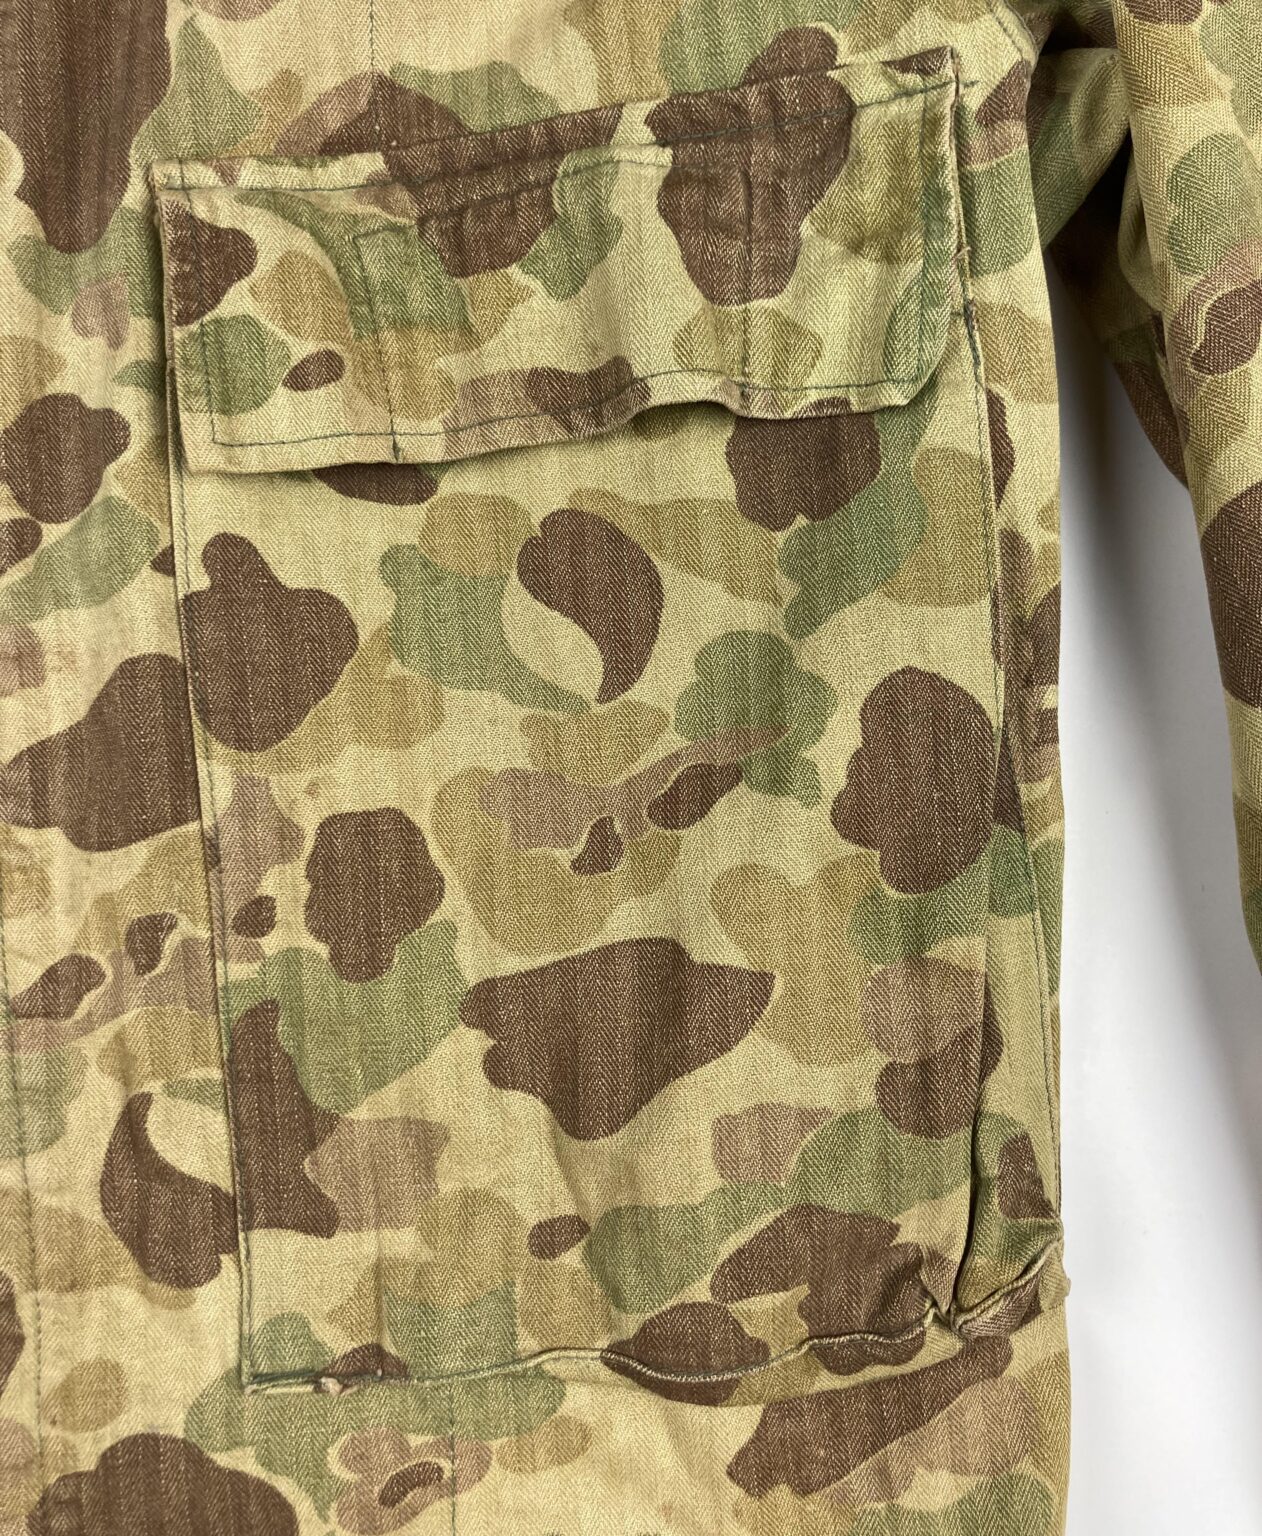 U.S Army Issued M1942 Camouflage Jacket